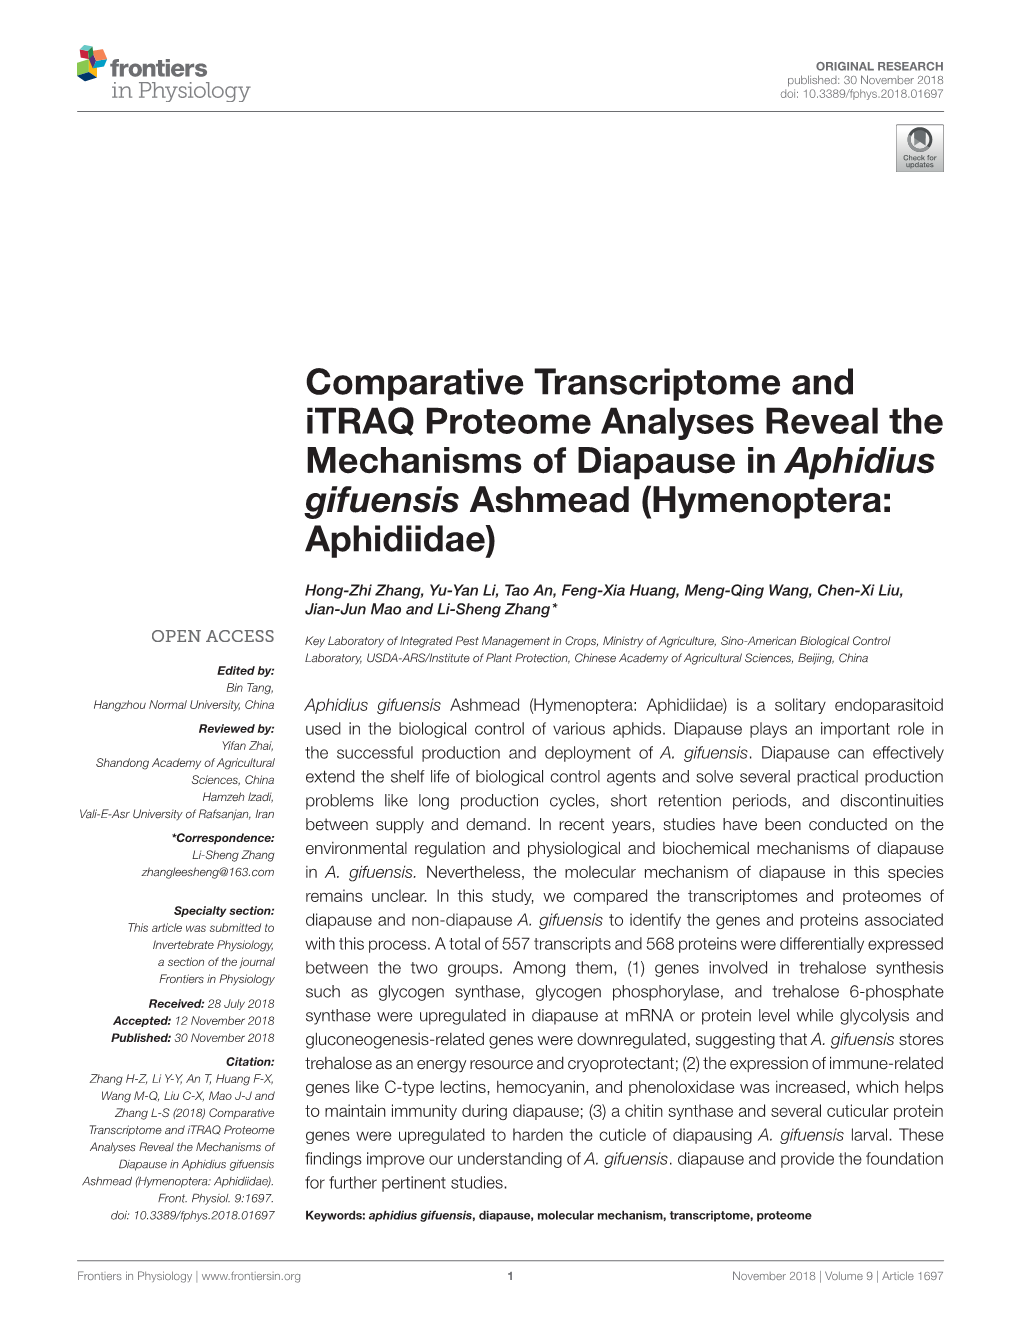 Comparative Transcriptome and Itraq Proteome Analyses Reveal the Mechanisms of Diapause in Aphidius Gifuensis Ashmead (Hymenoptera: Aphidiidae)